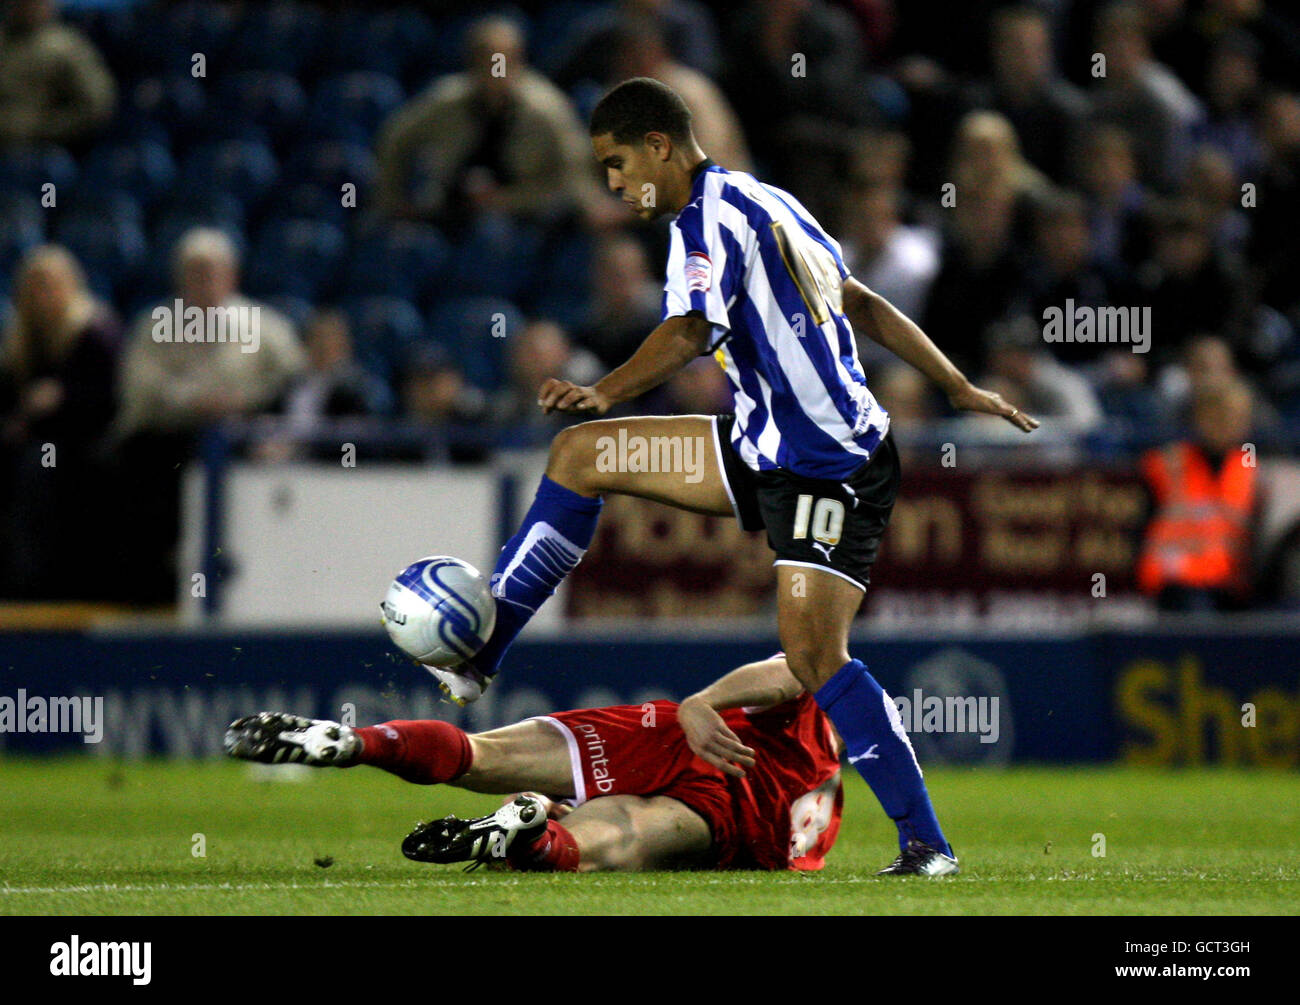 Sheffield Wednesday's Giles Coke is tackled by Chesterfield's Derek Niven Stock Photo